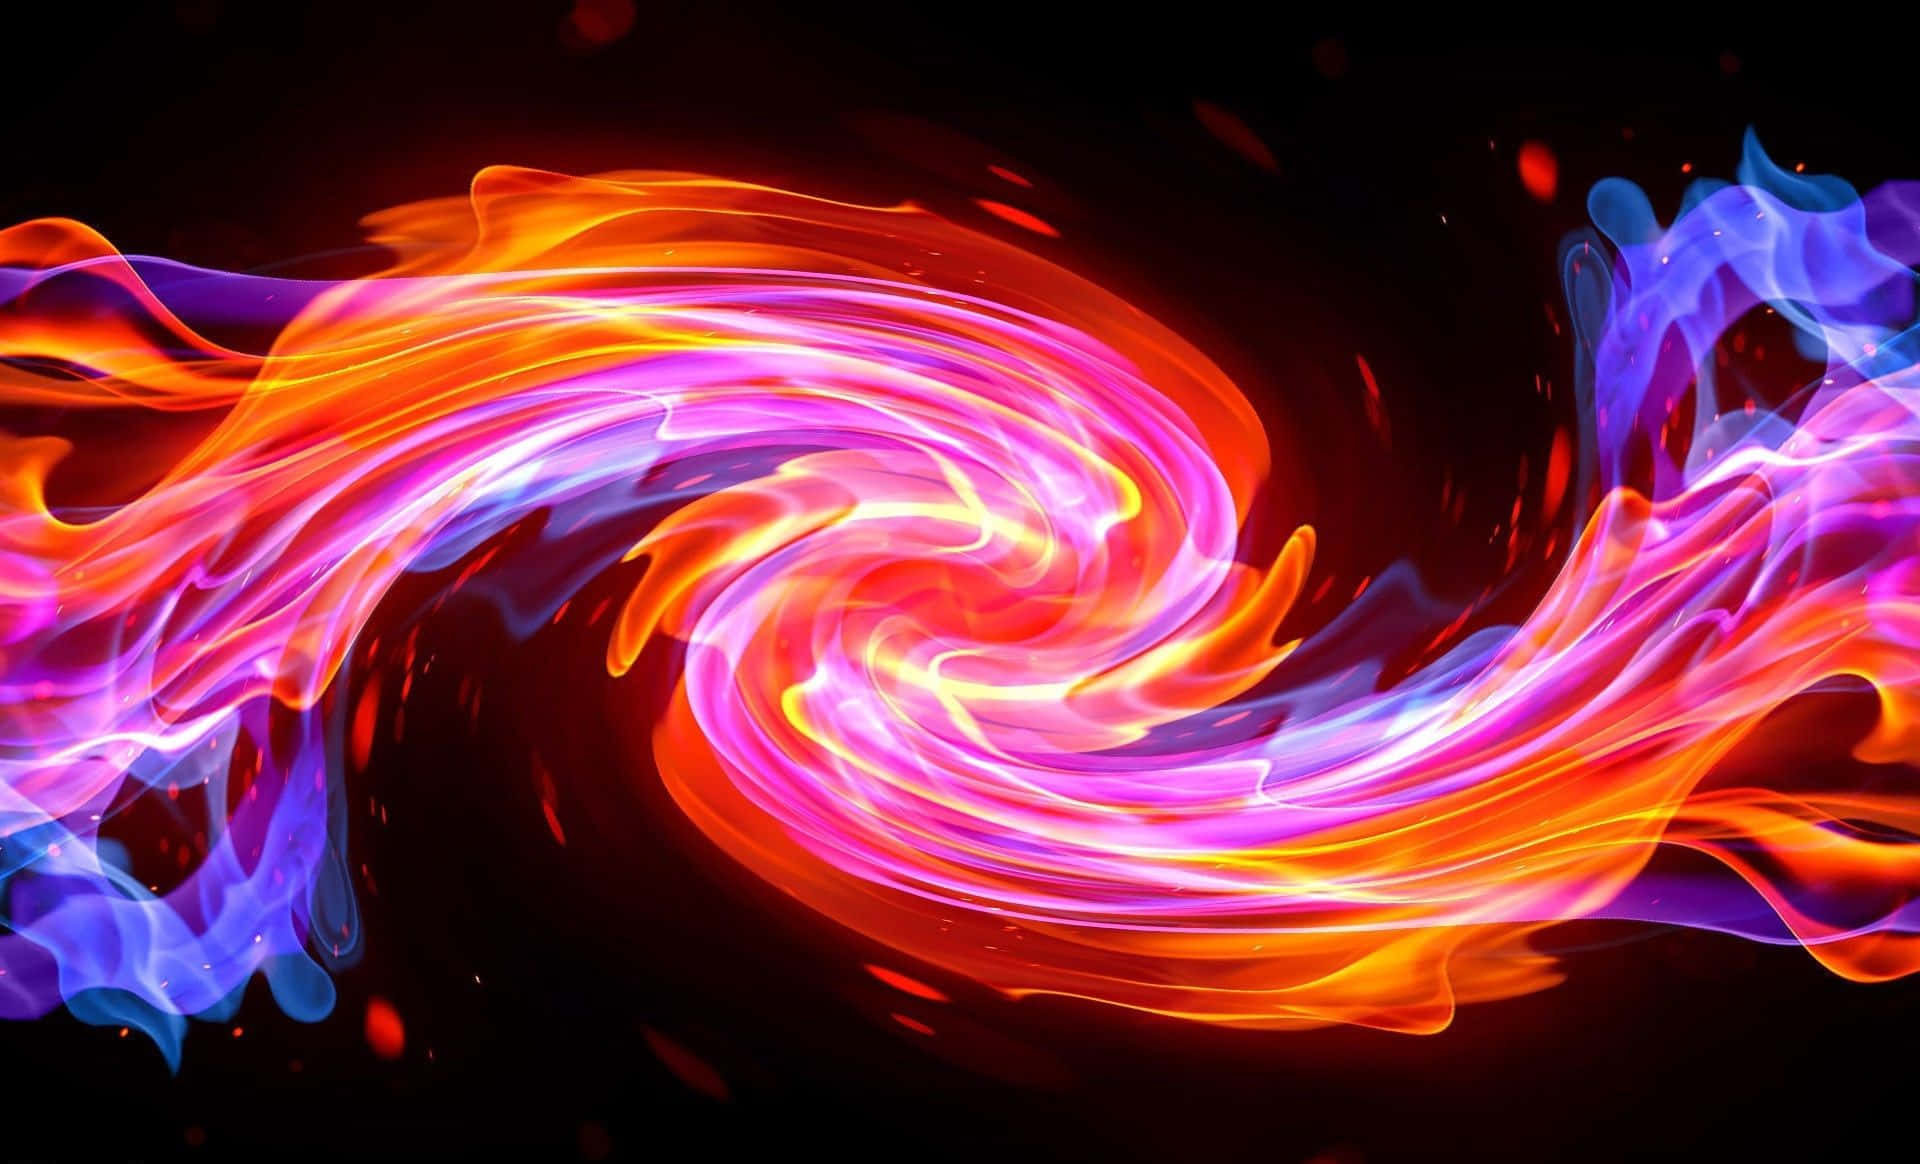 Feel the burn with this blazing hot red and blue flames. Wallpaper